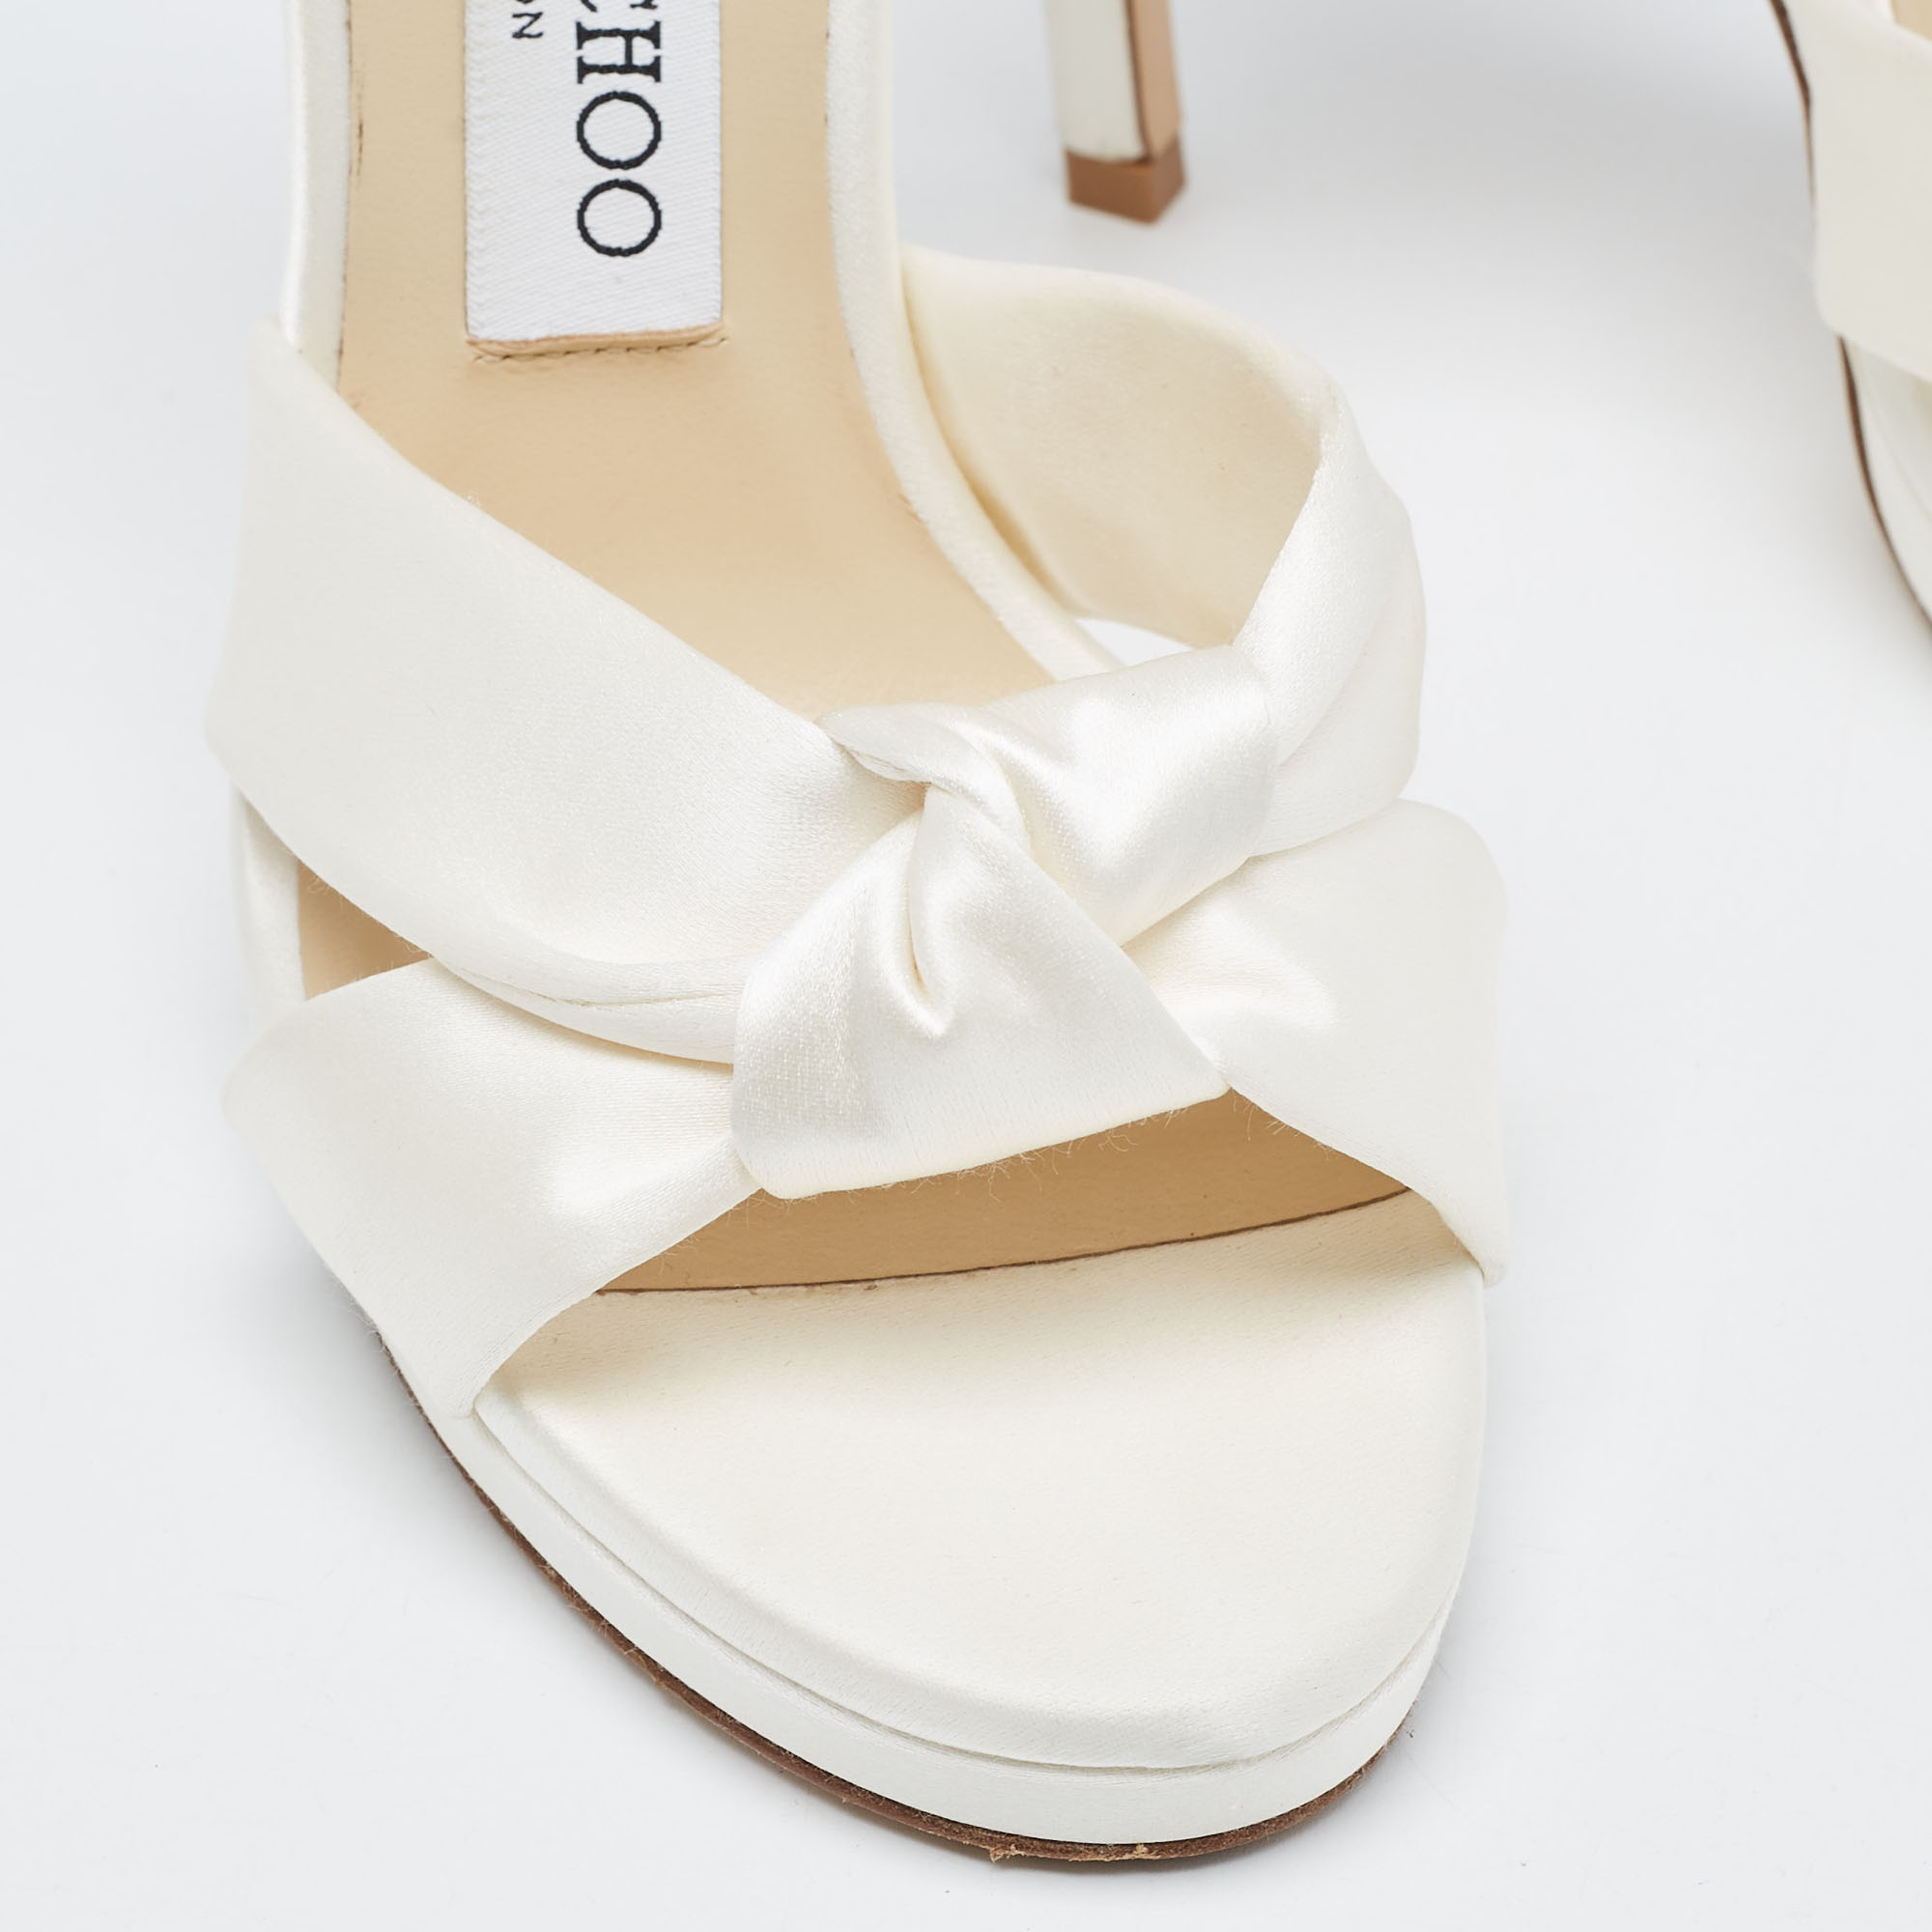 Jimmy Choo Ivory Satin Rosie Ankle Strap Sandals Size 37